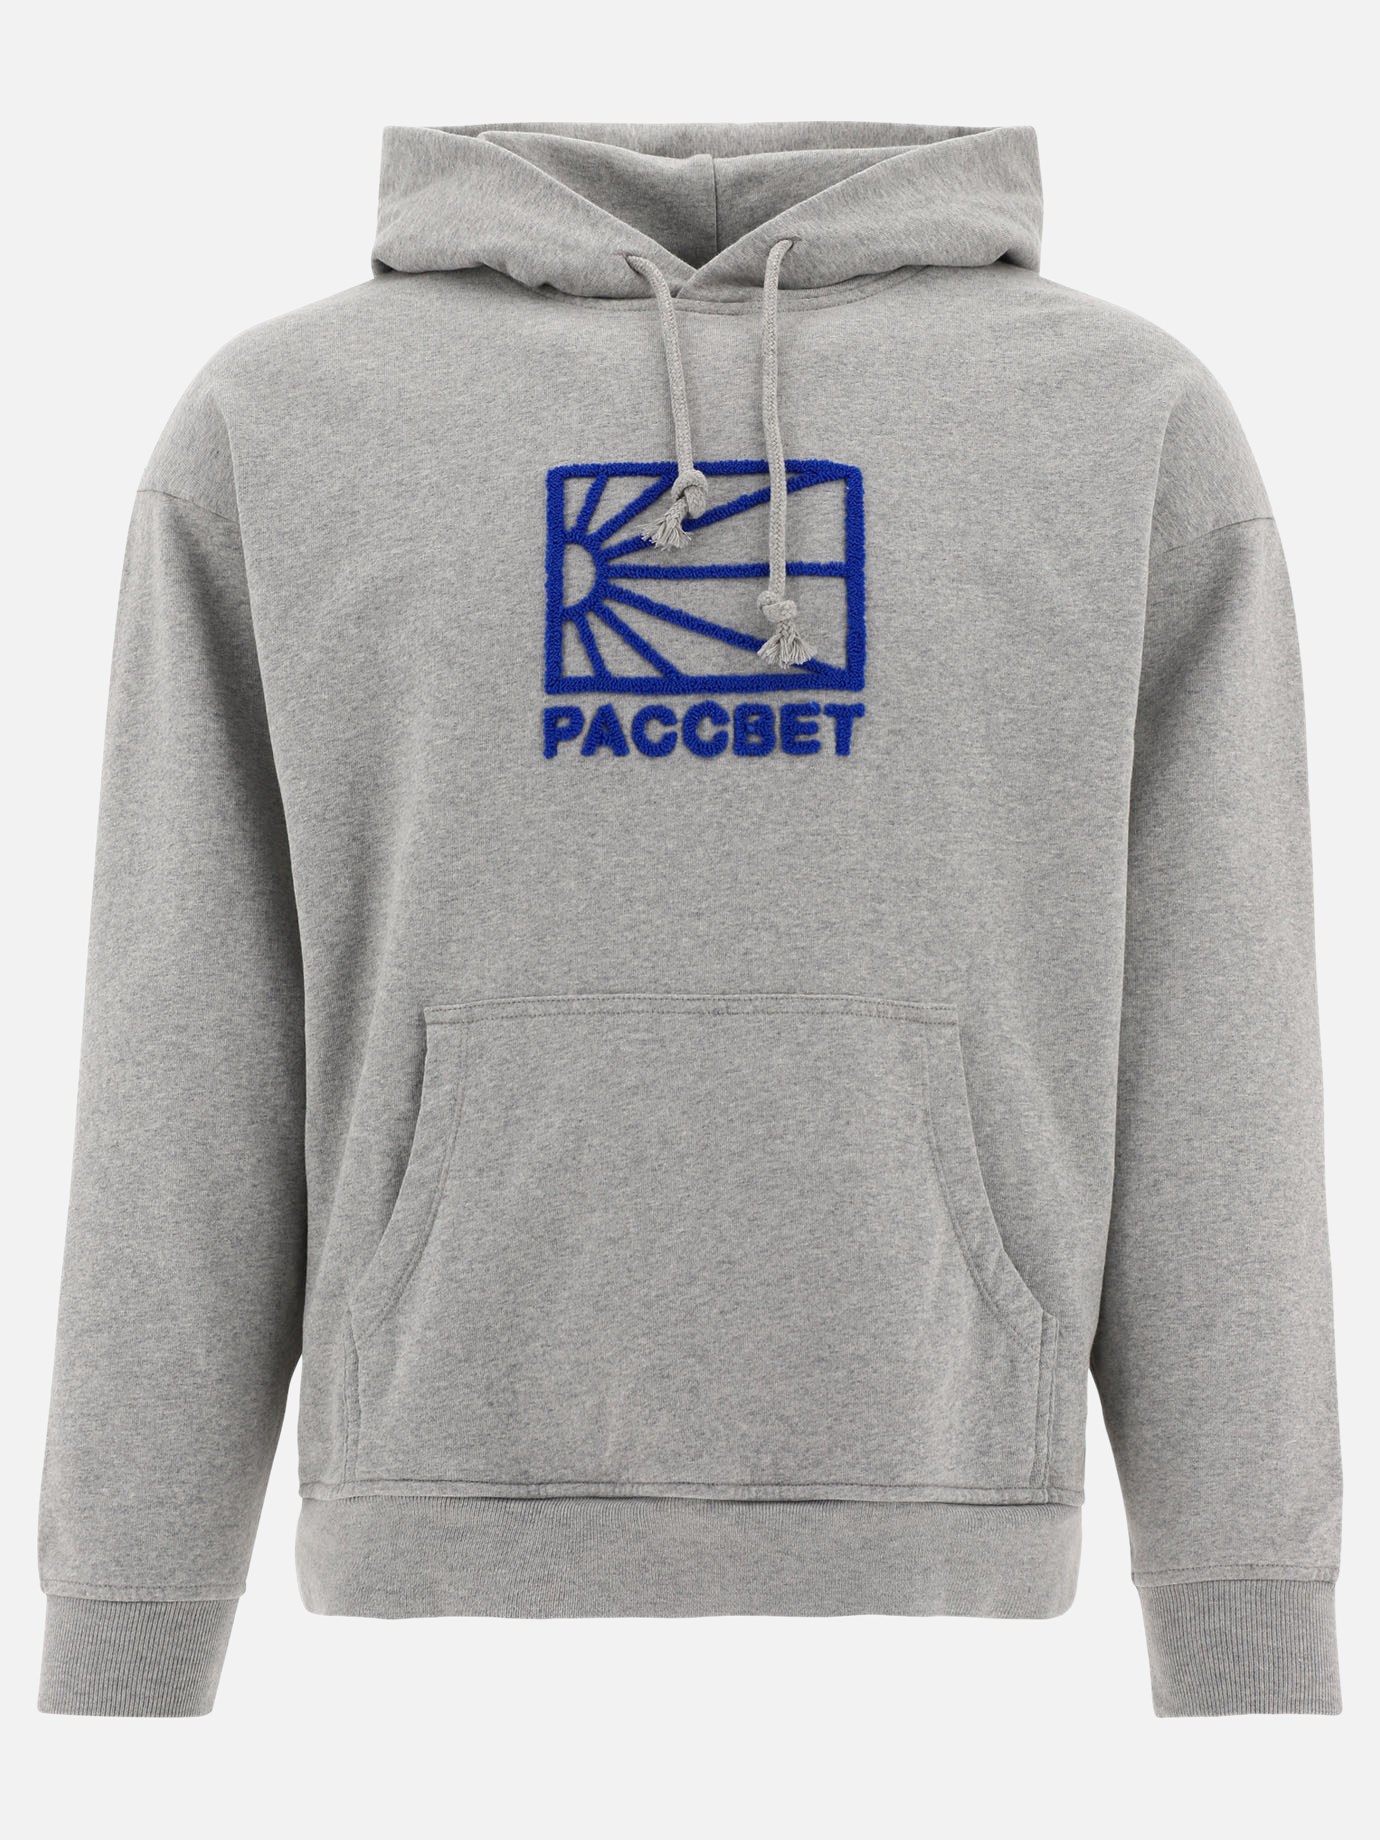 Sweatshirt with embroideryby Paccbet - 1